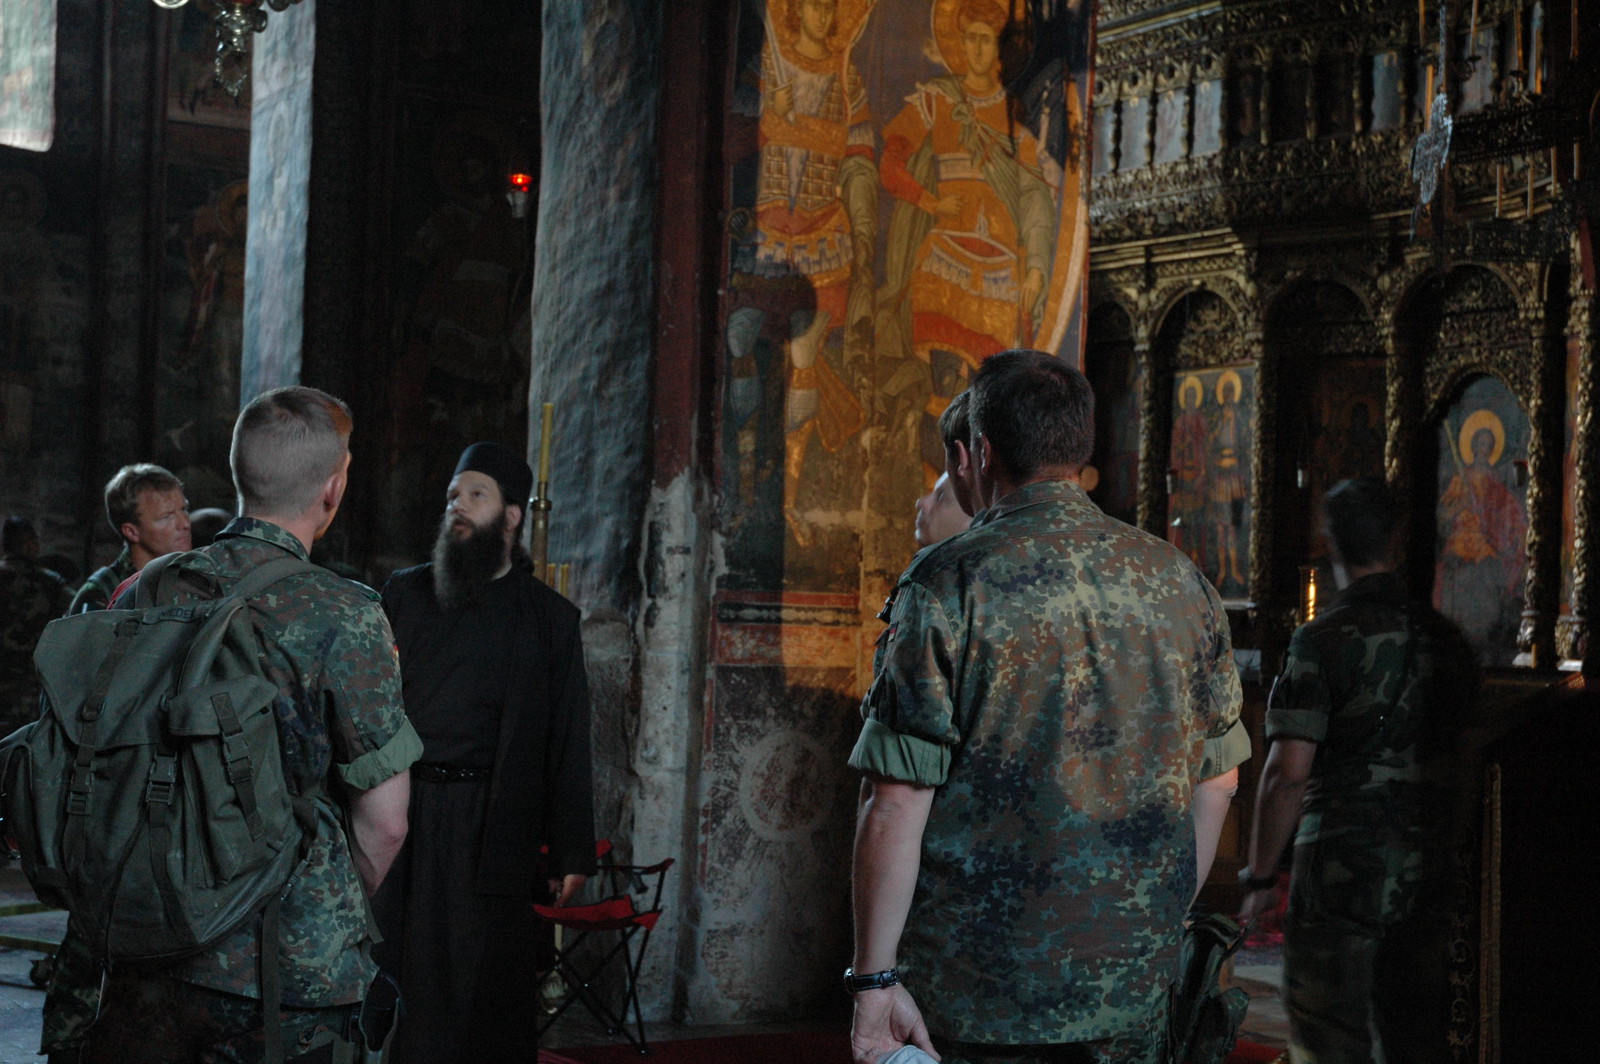 KFOR Soldiers visiting the Monastery 1